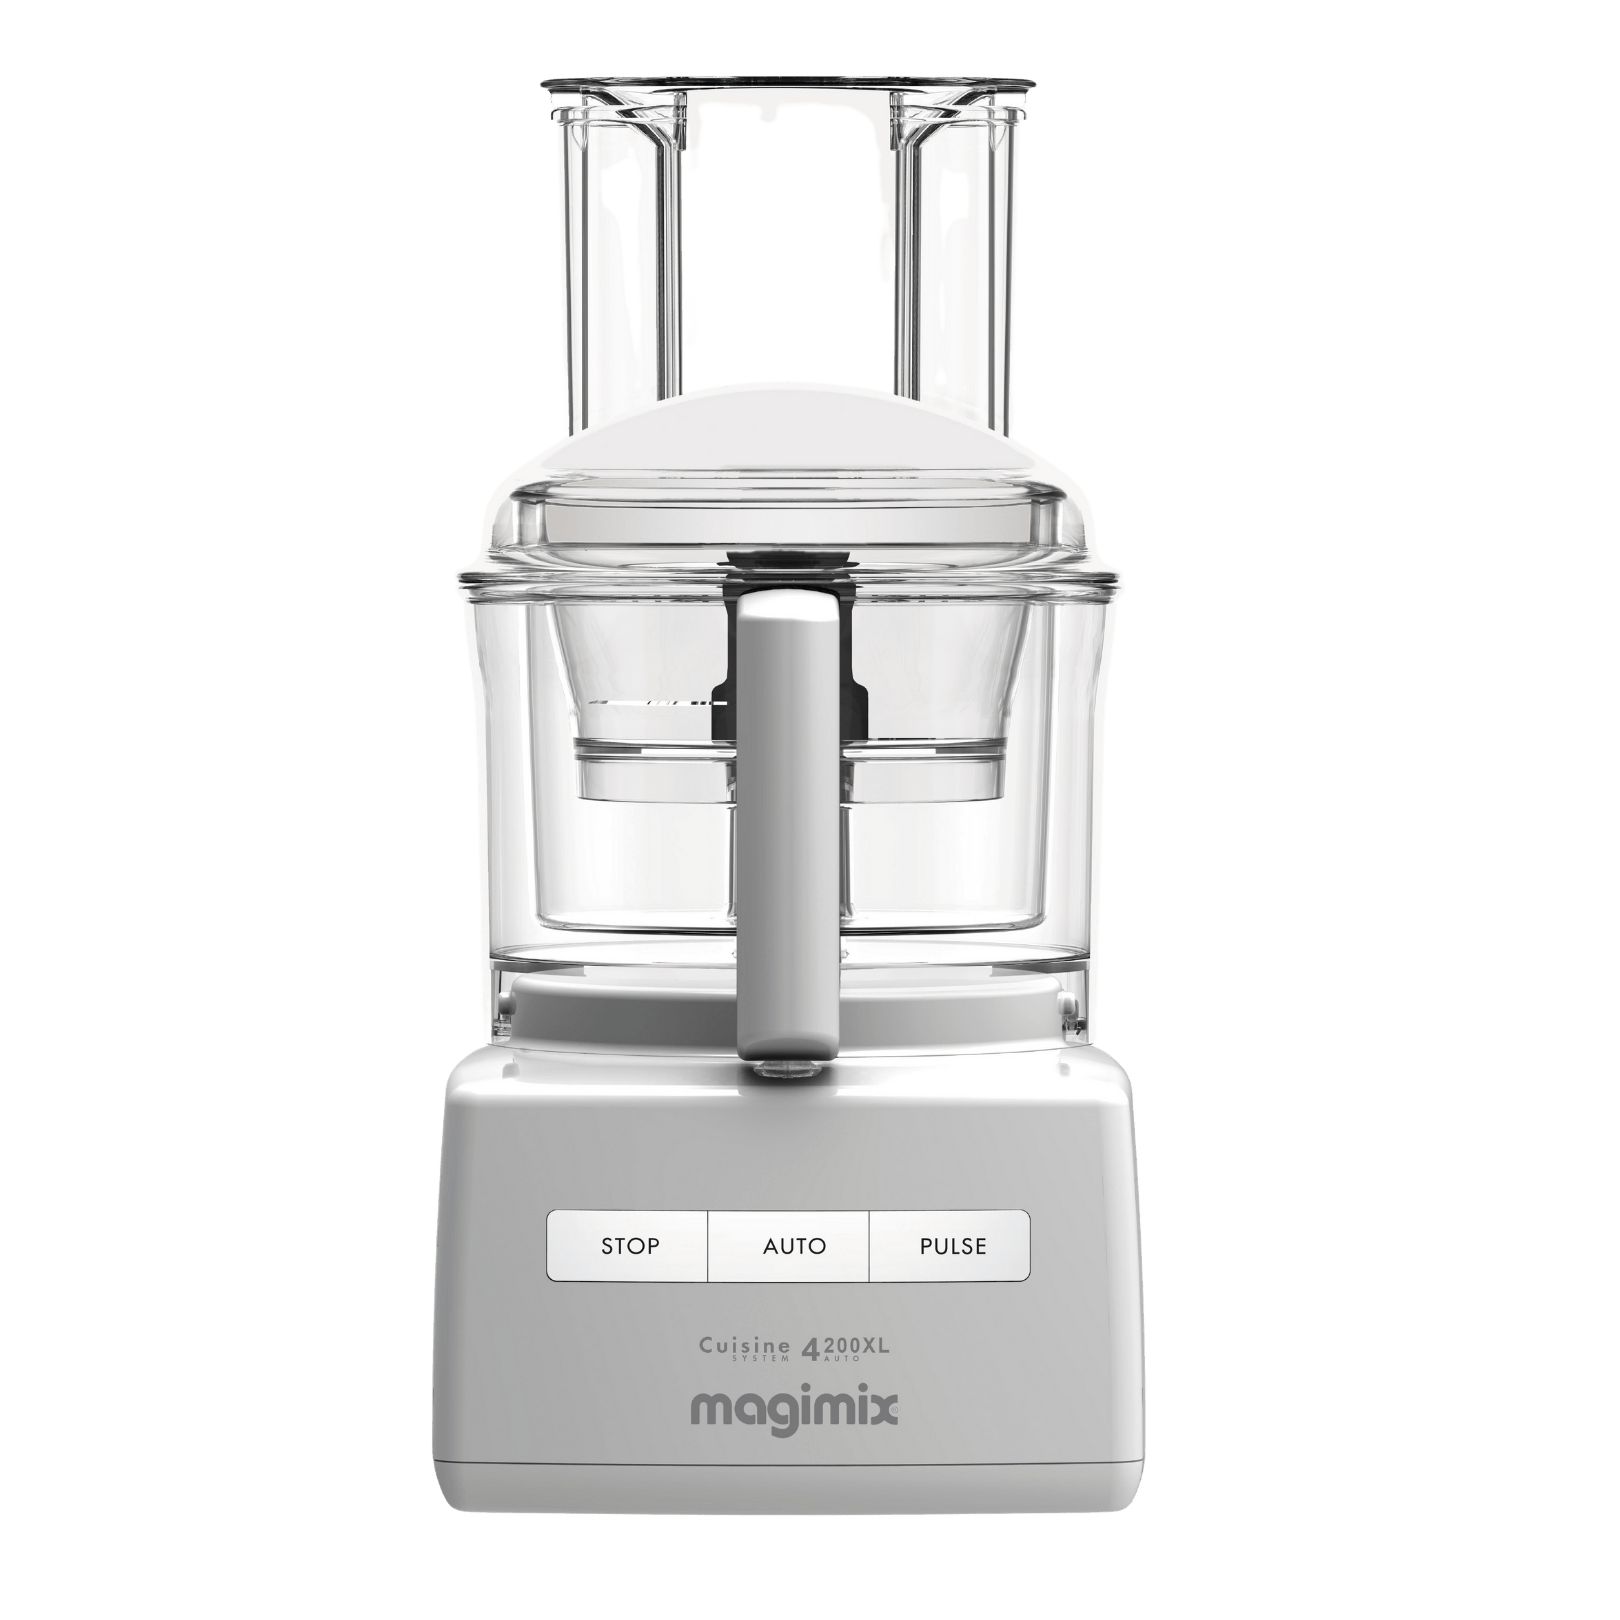 Magimix Food Processor 14 Cups 4200XL Made in France 30 Year Warranty Best Selling